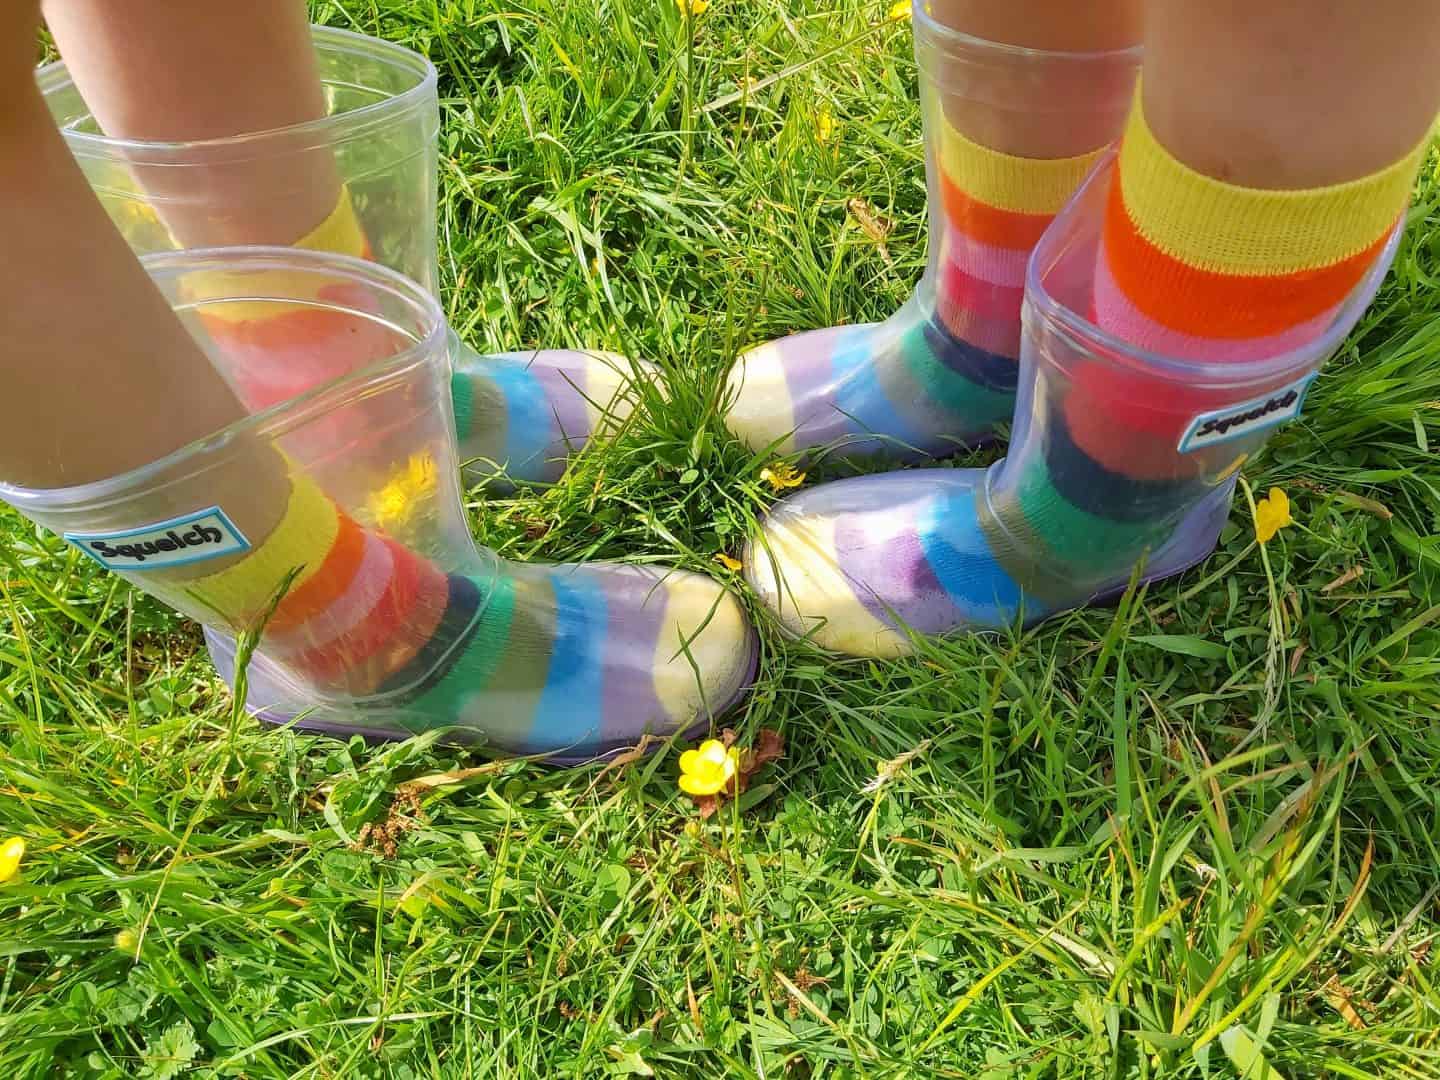 Two pairs of feet in see through wellies with rainbow socks